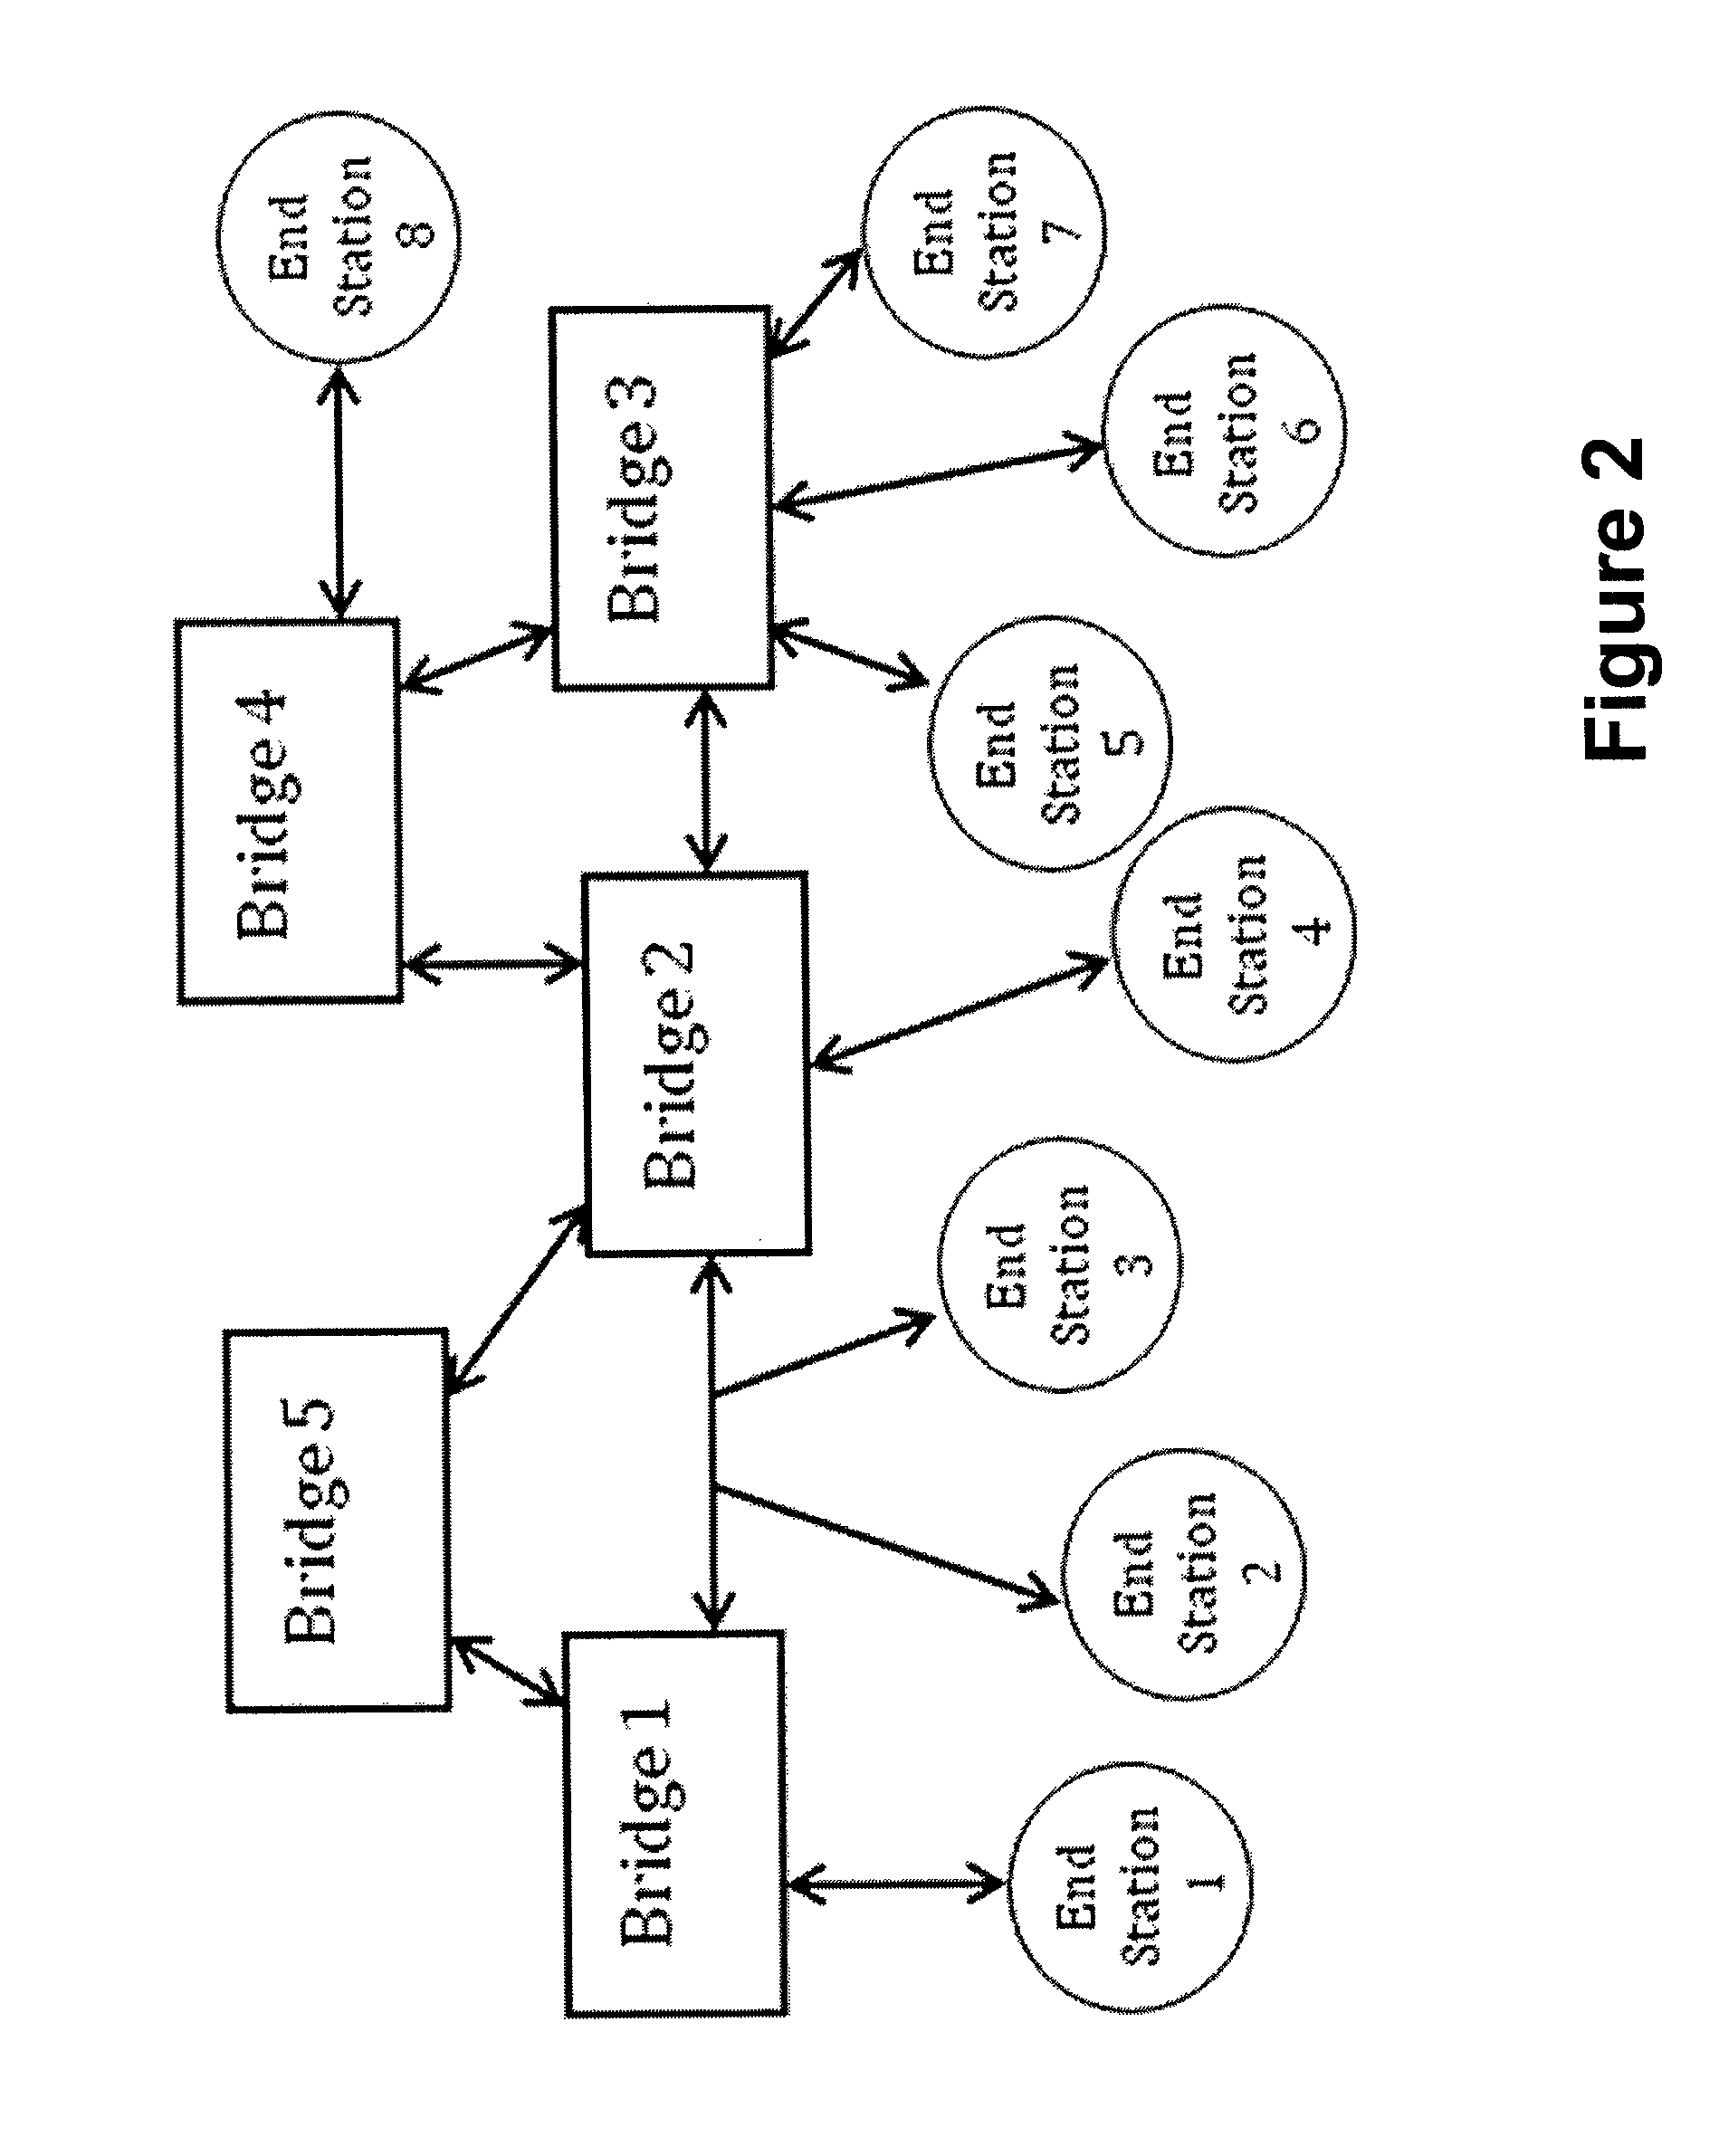 Methods and apparatus for RBridge hop-by-hop compression and frame aggregation